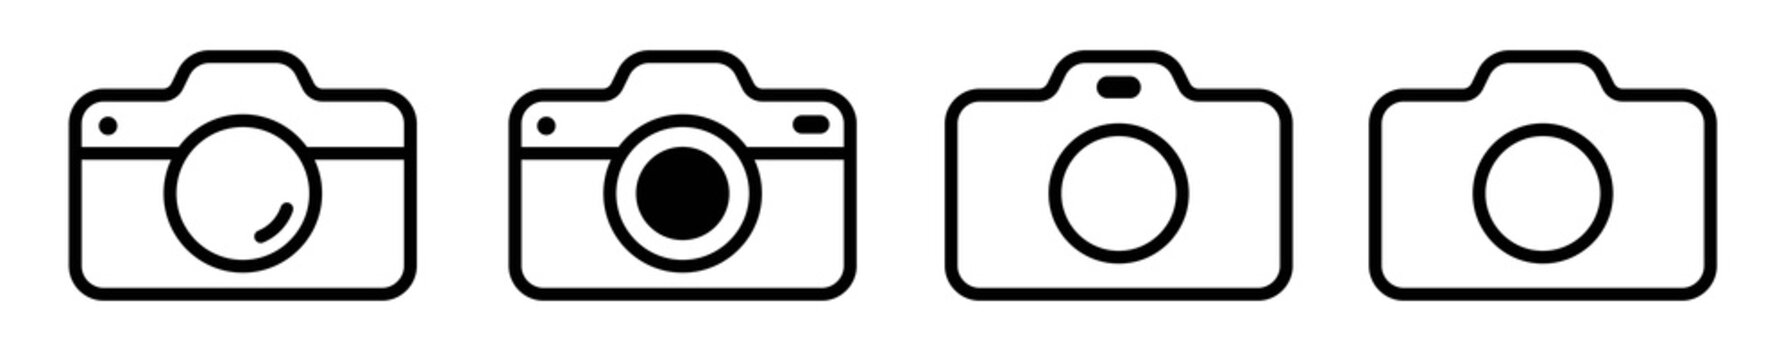 Сamera icons set. Photo camera vector icon for apps and websites.Vector illustration